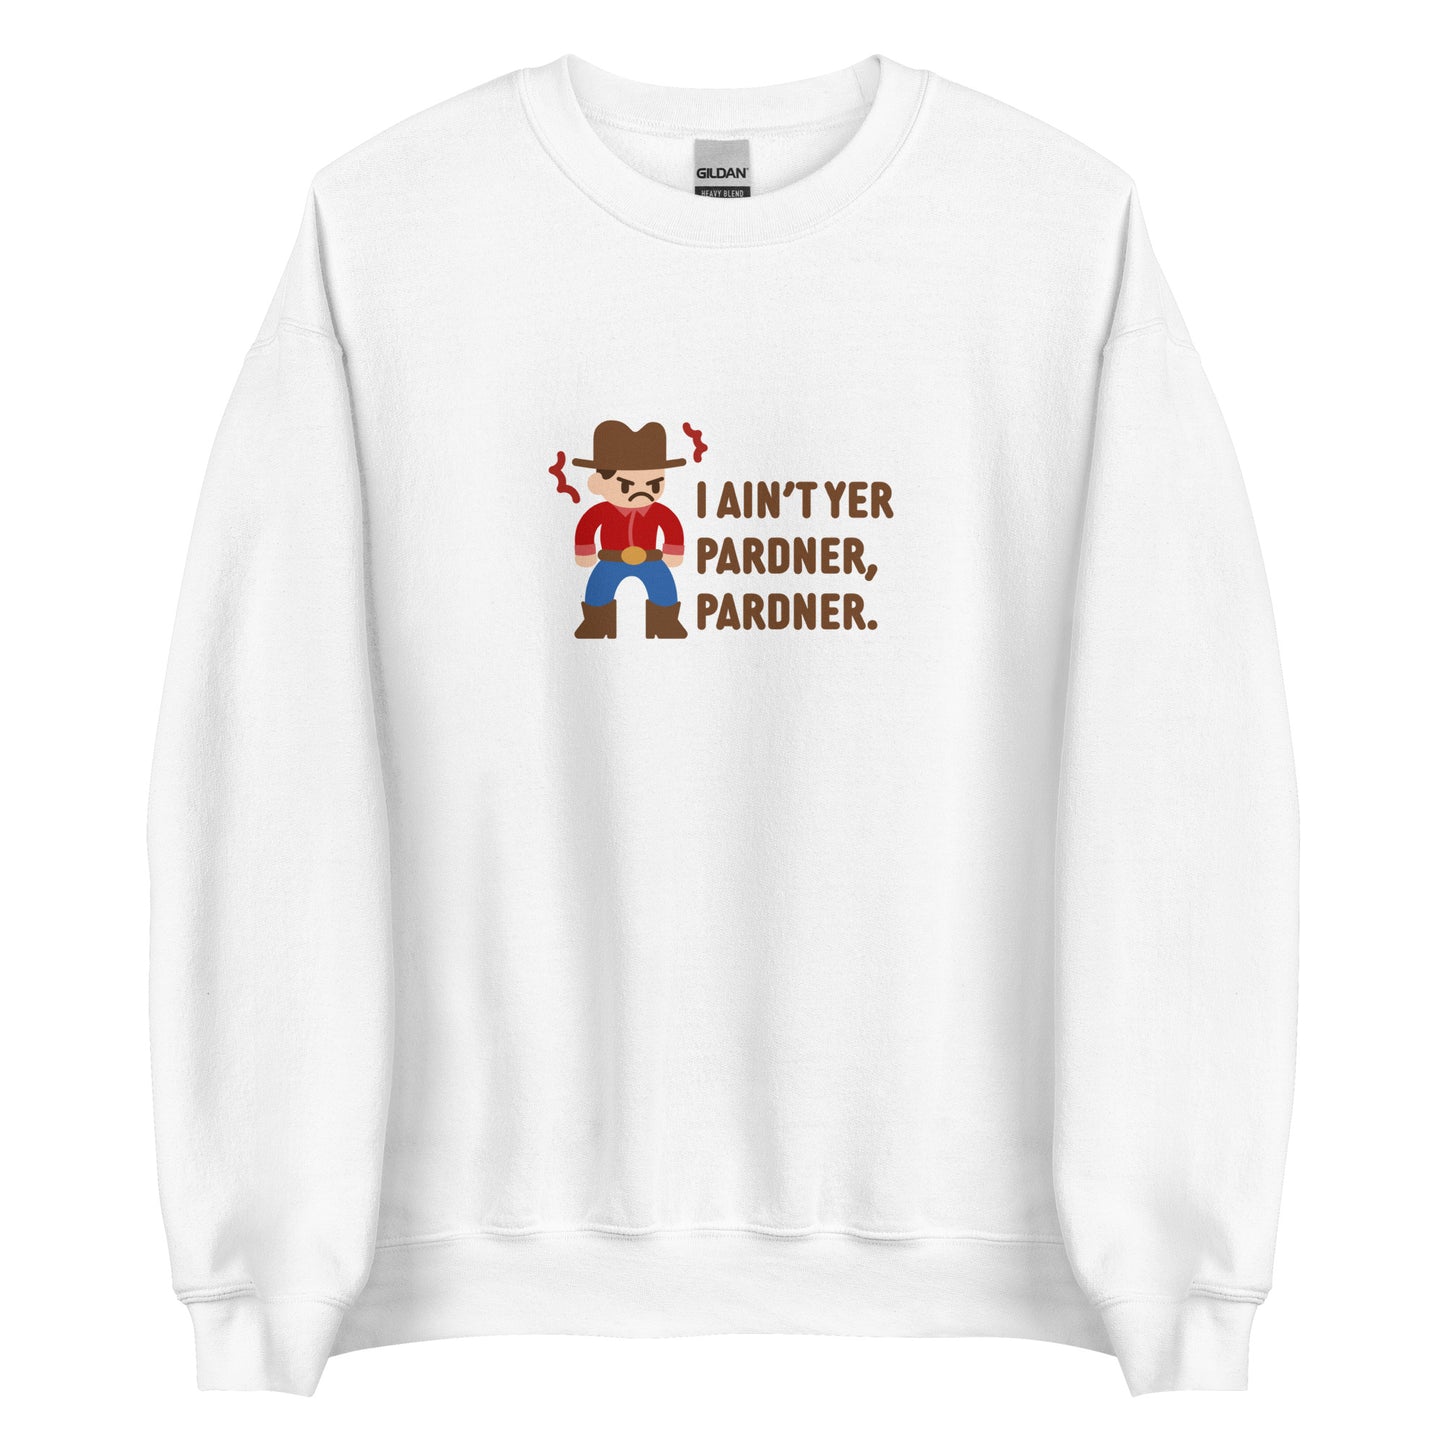 A white crewneck sweatshirt featuring an illustration of a grumpy cowboy wearing a red shirt. Text beneath the cowboy reads "I ain't yer pardner, pardner."